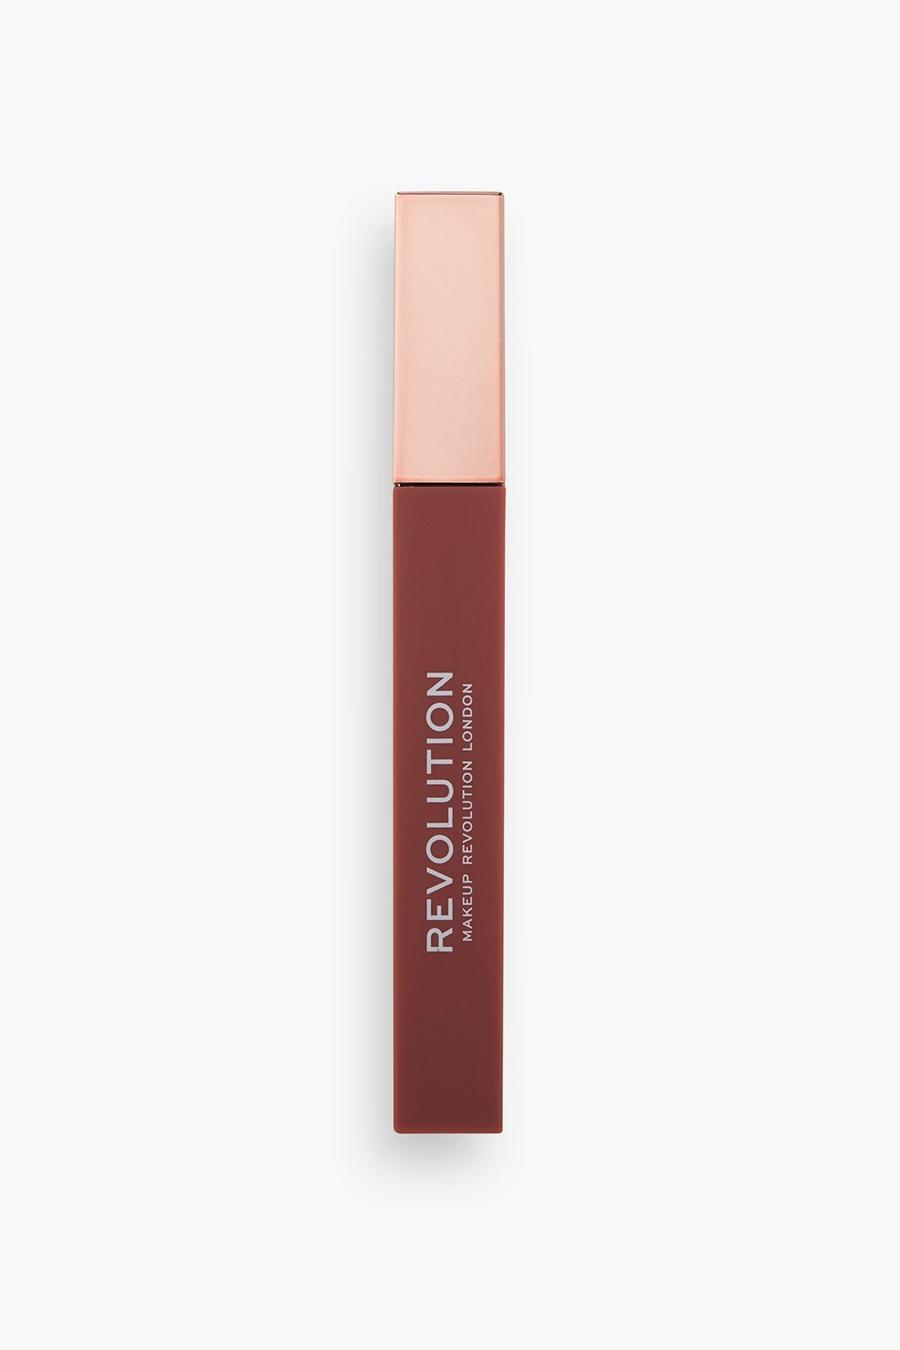 Revolution IRL Whipped Lip Creme, Frappuccino nude image number 1